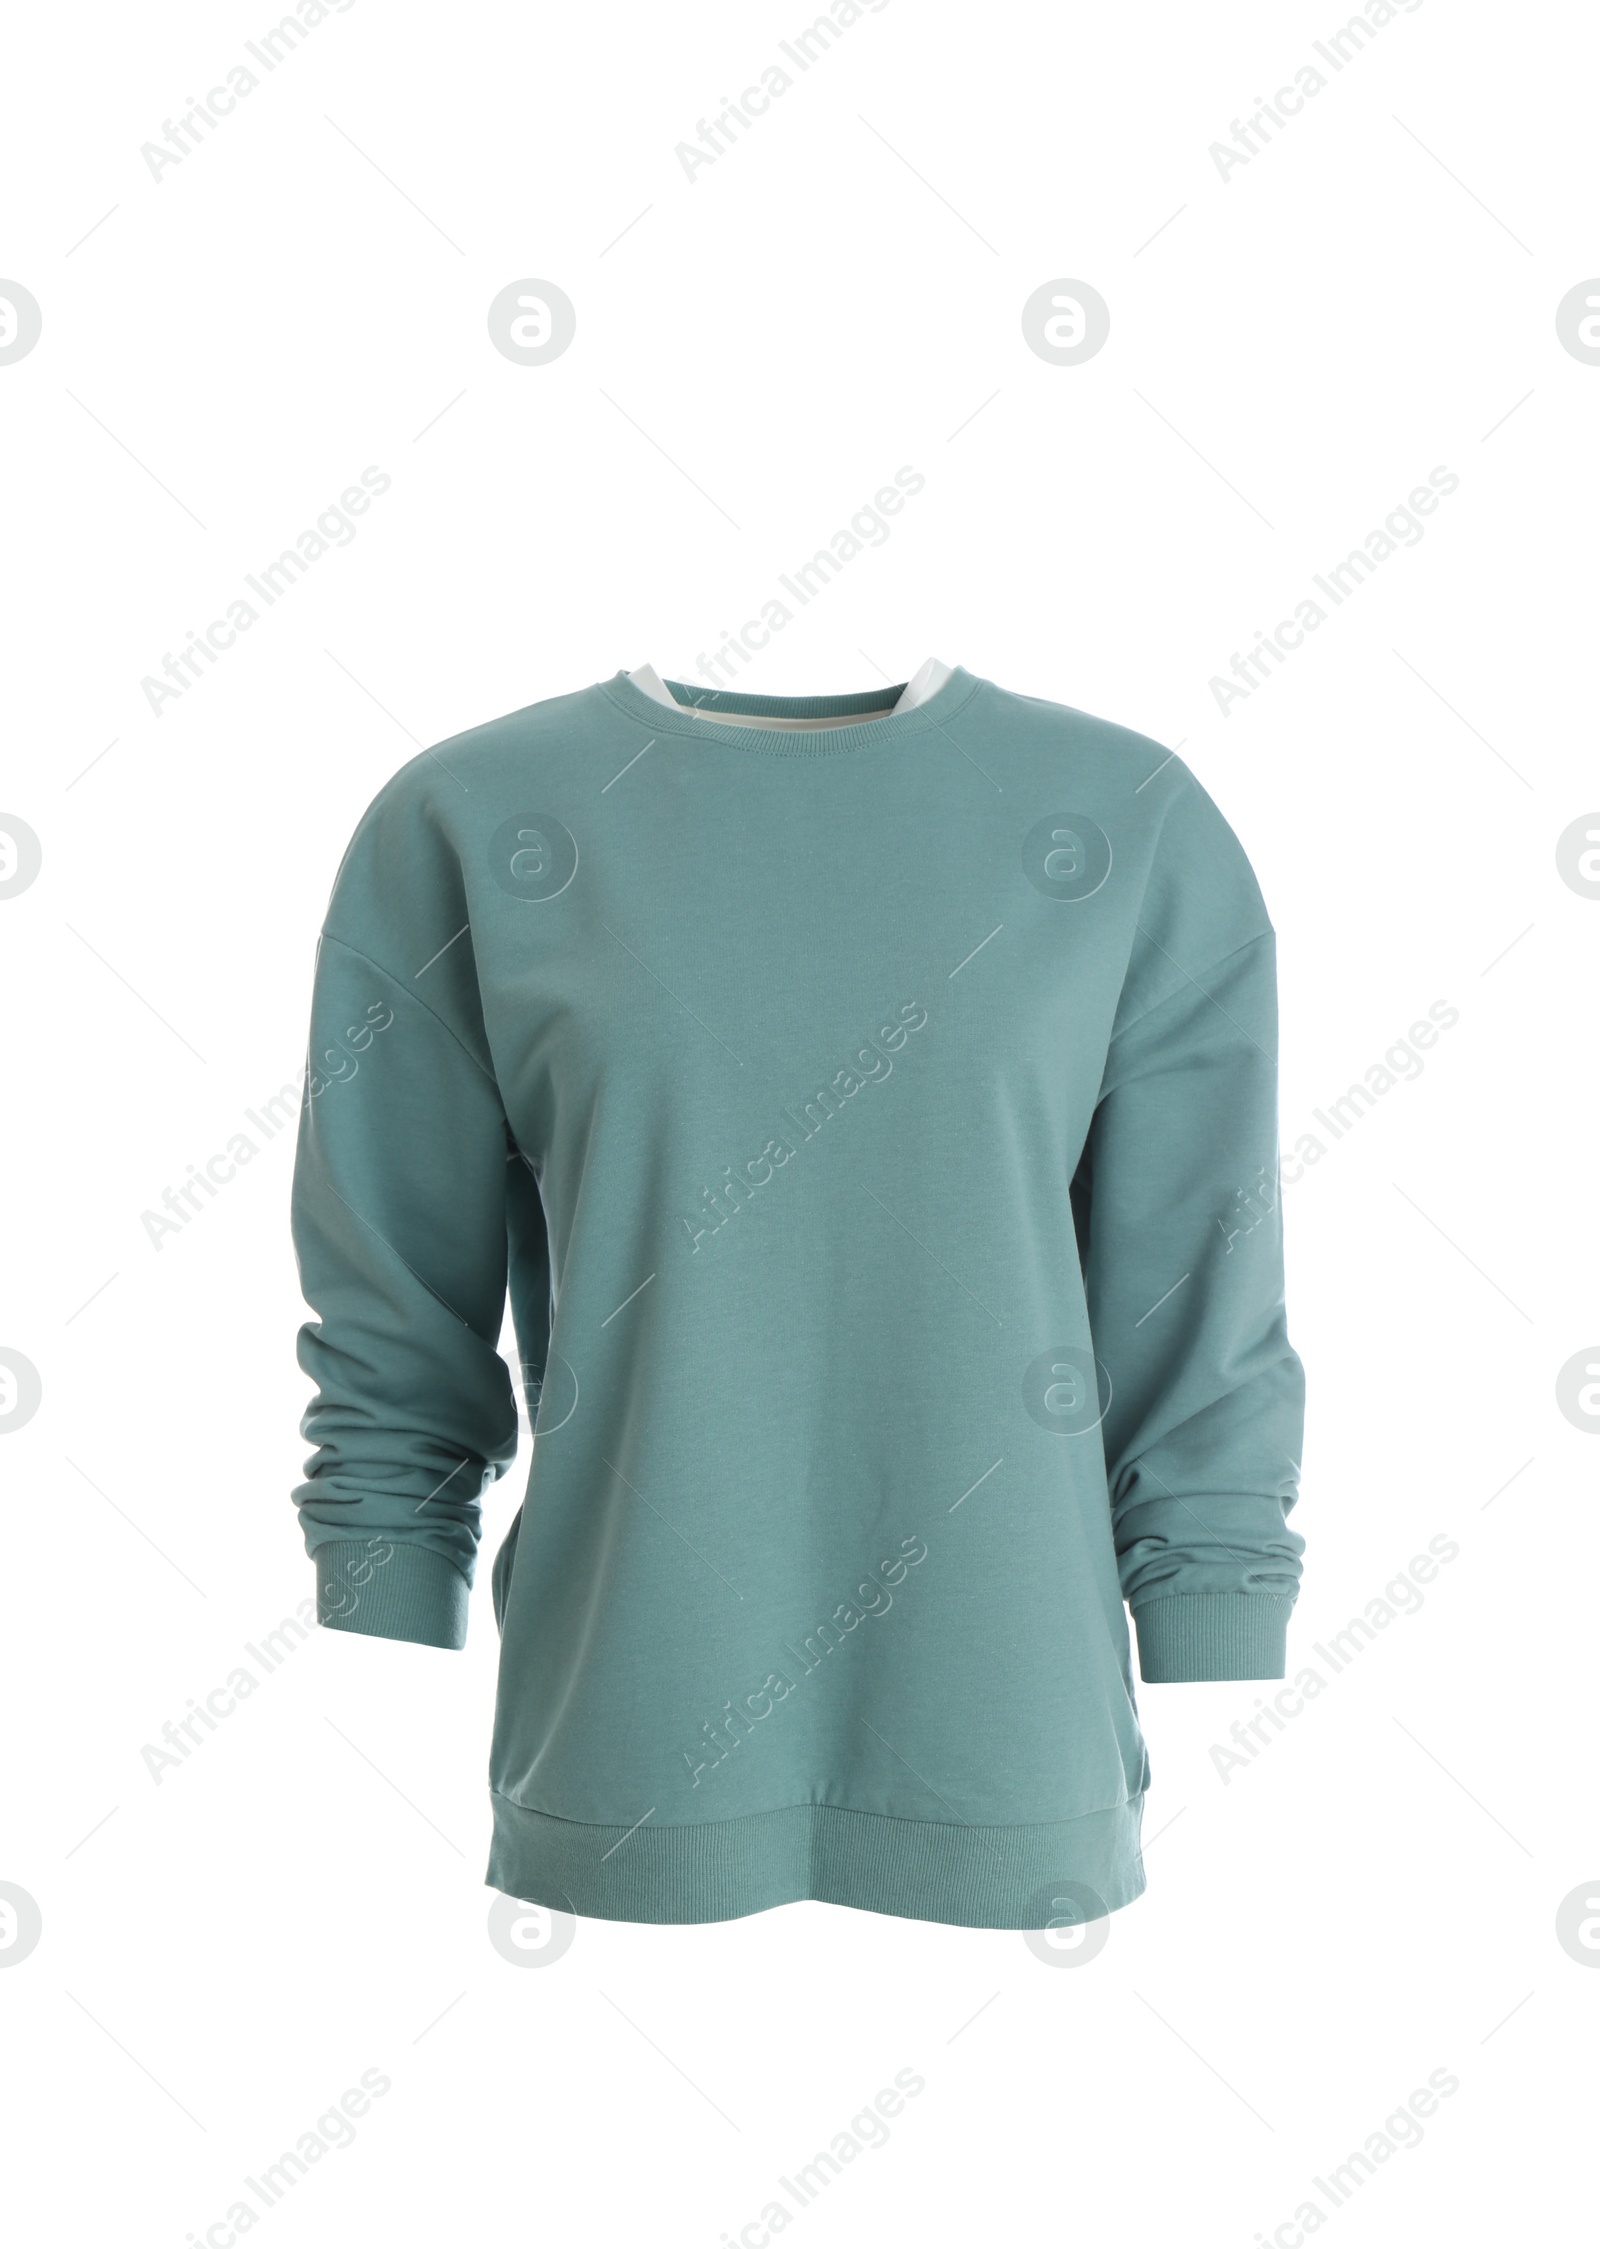 Photo of Stylish sweater on mannequin against white background. Trendy clothes